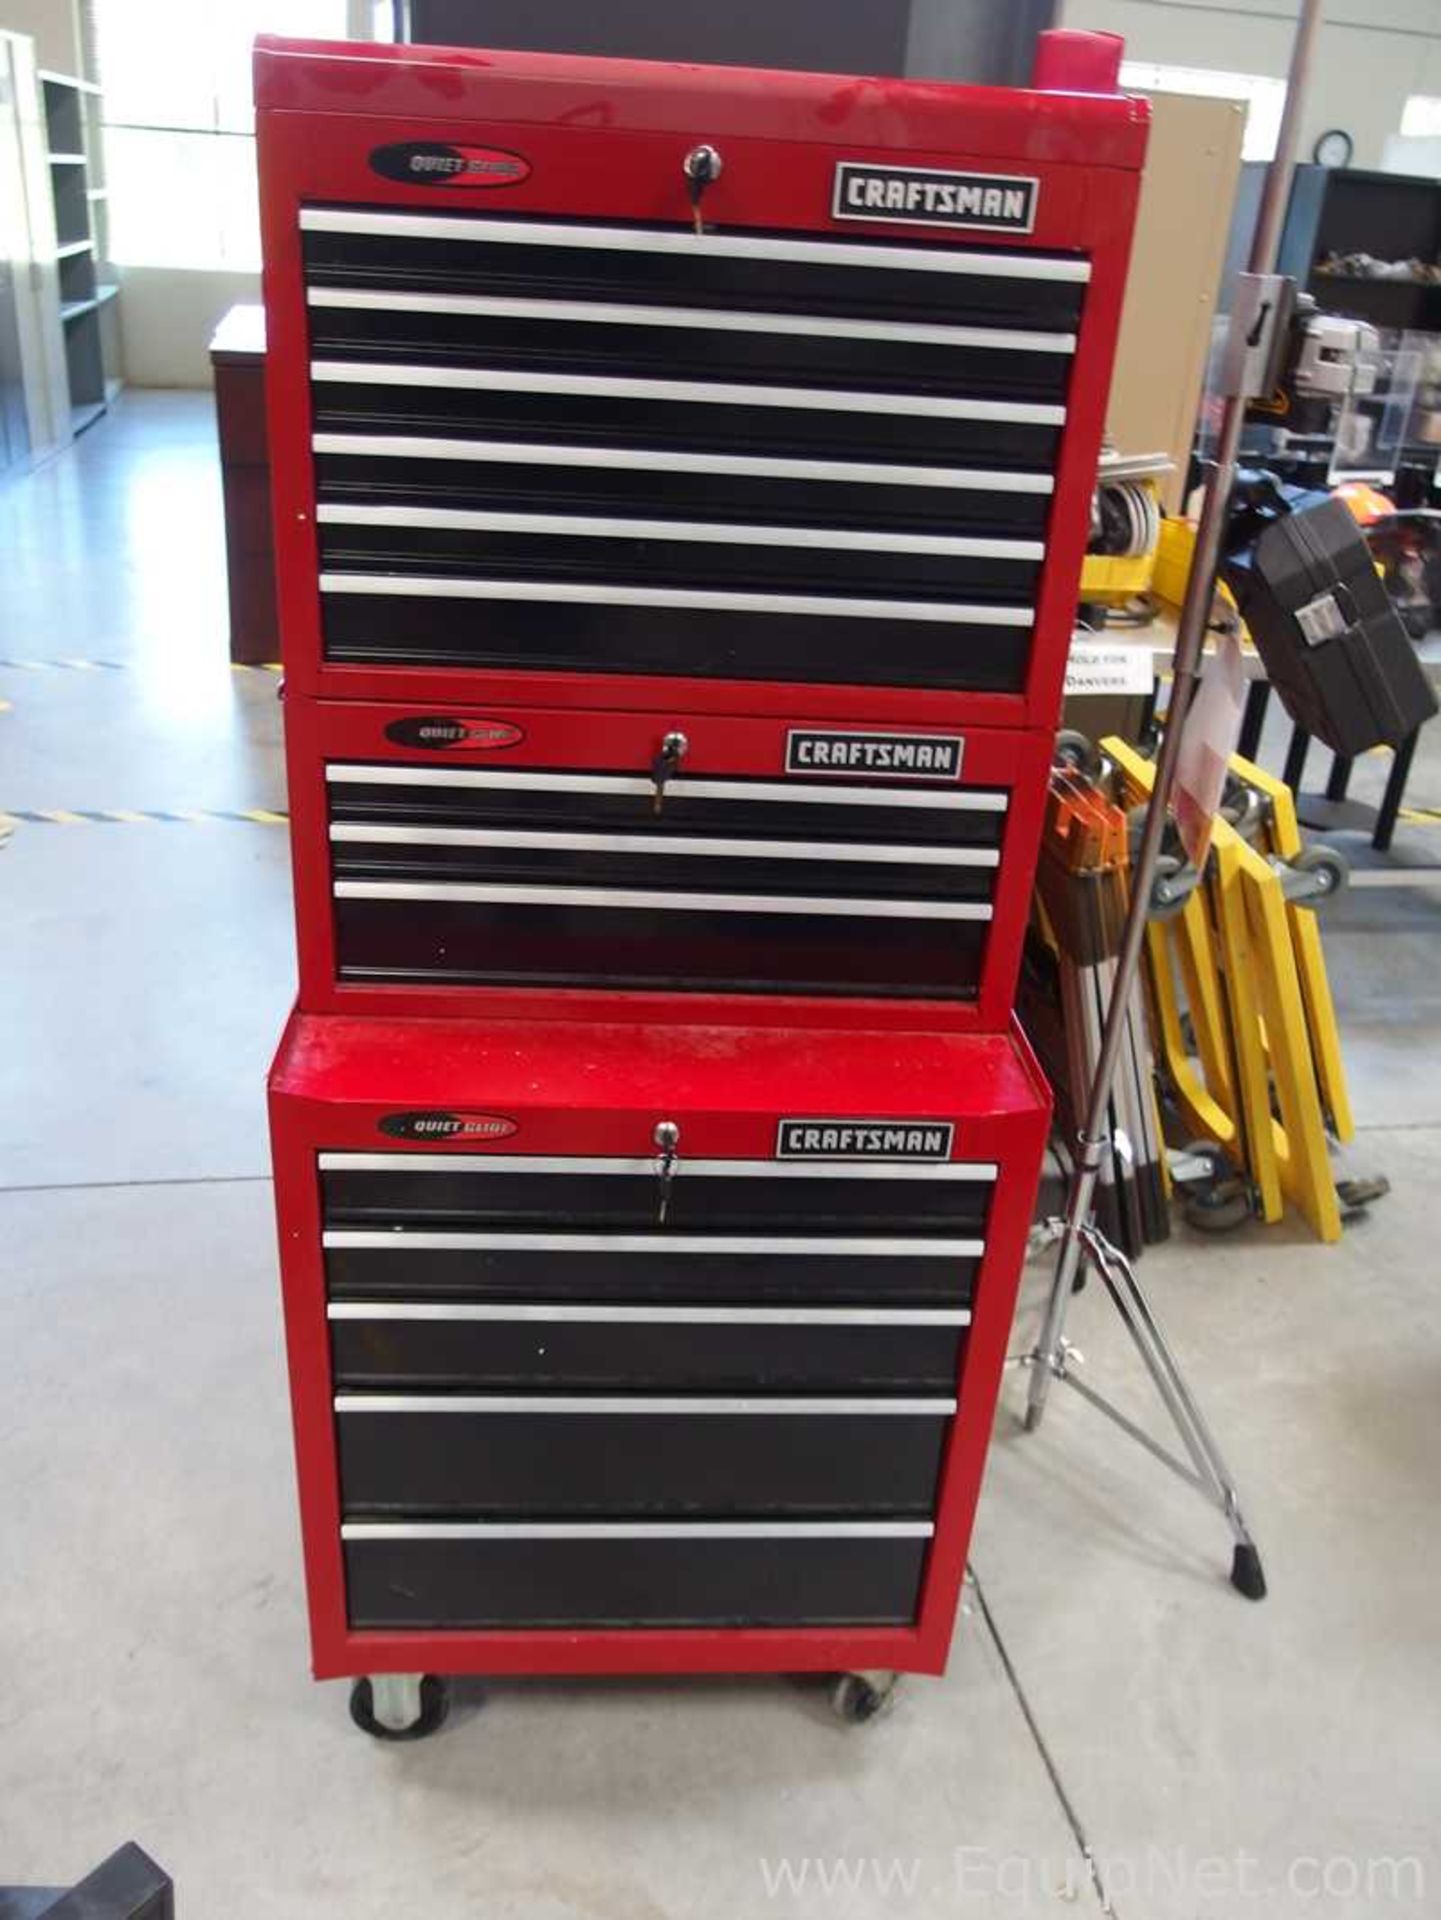 Craftsman 3 Tier Tool Chest on Casters